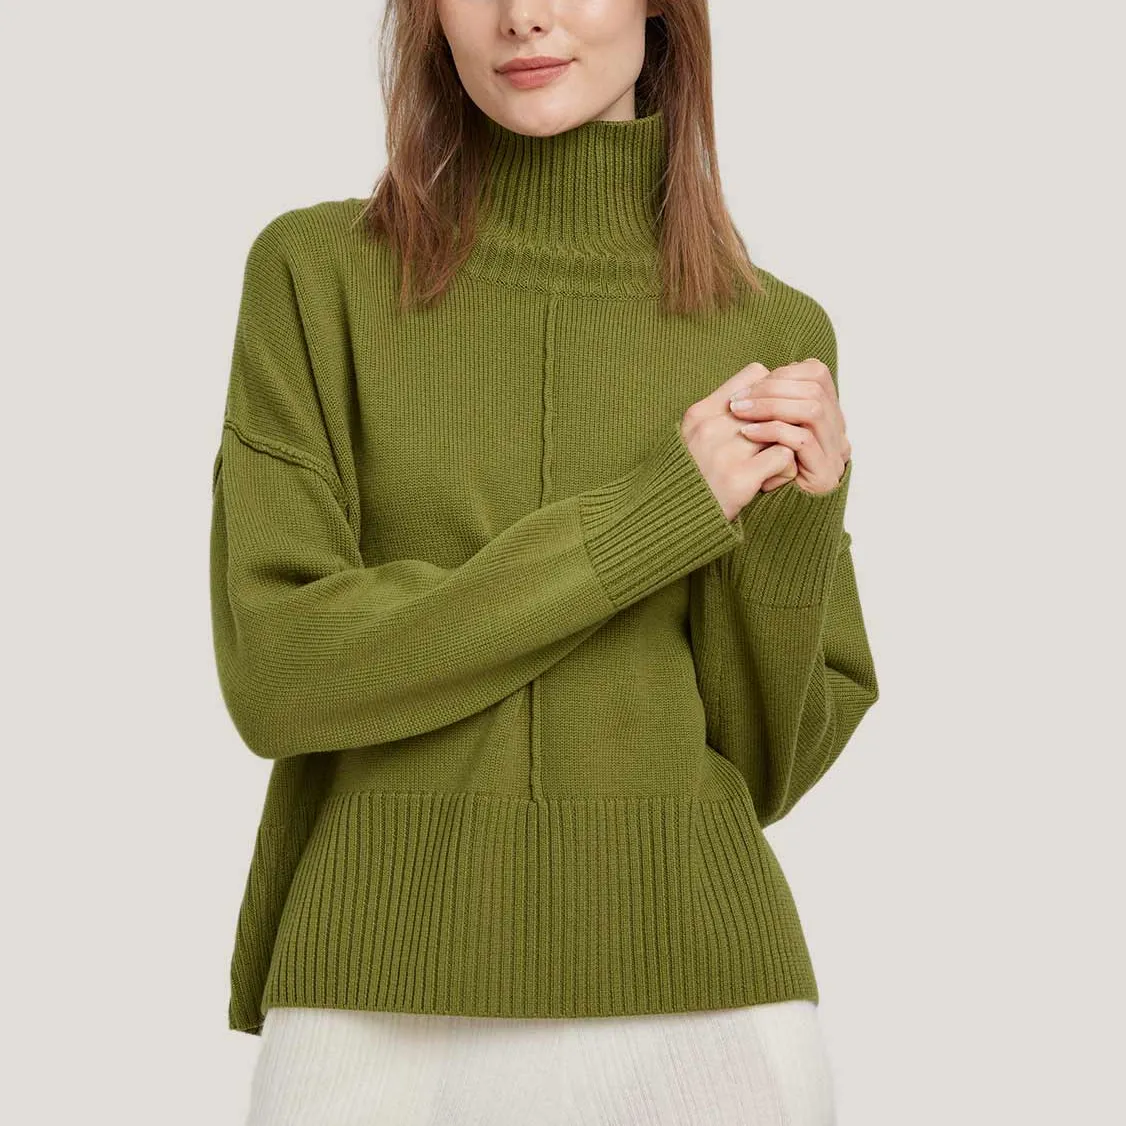 VSCOO brand new design turtleneck solid color cable long sleeve custom pullover knit sweater women